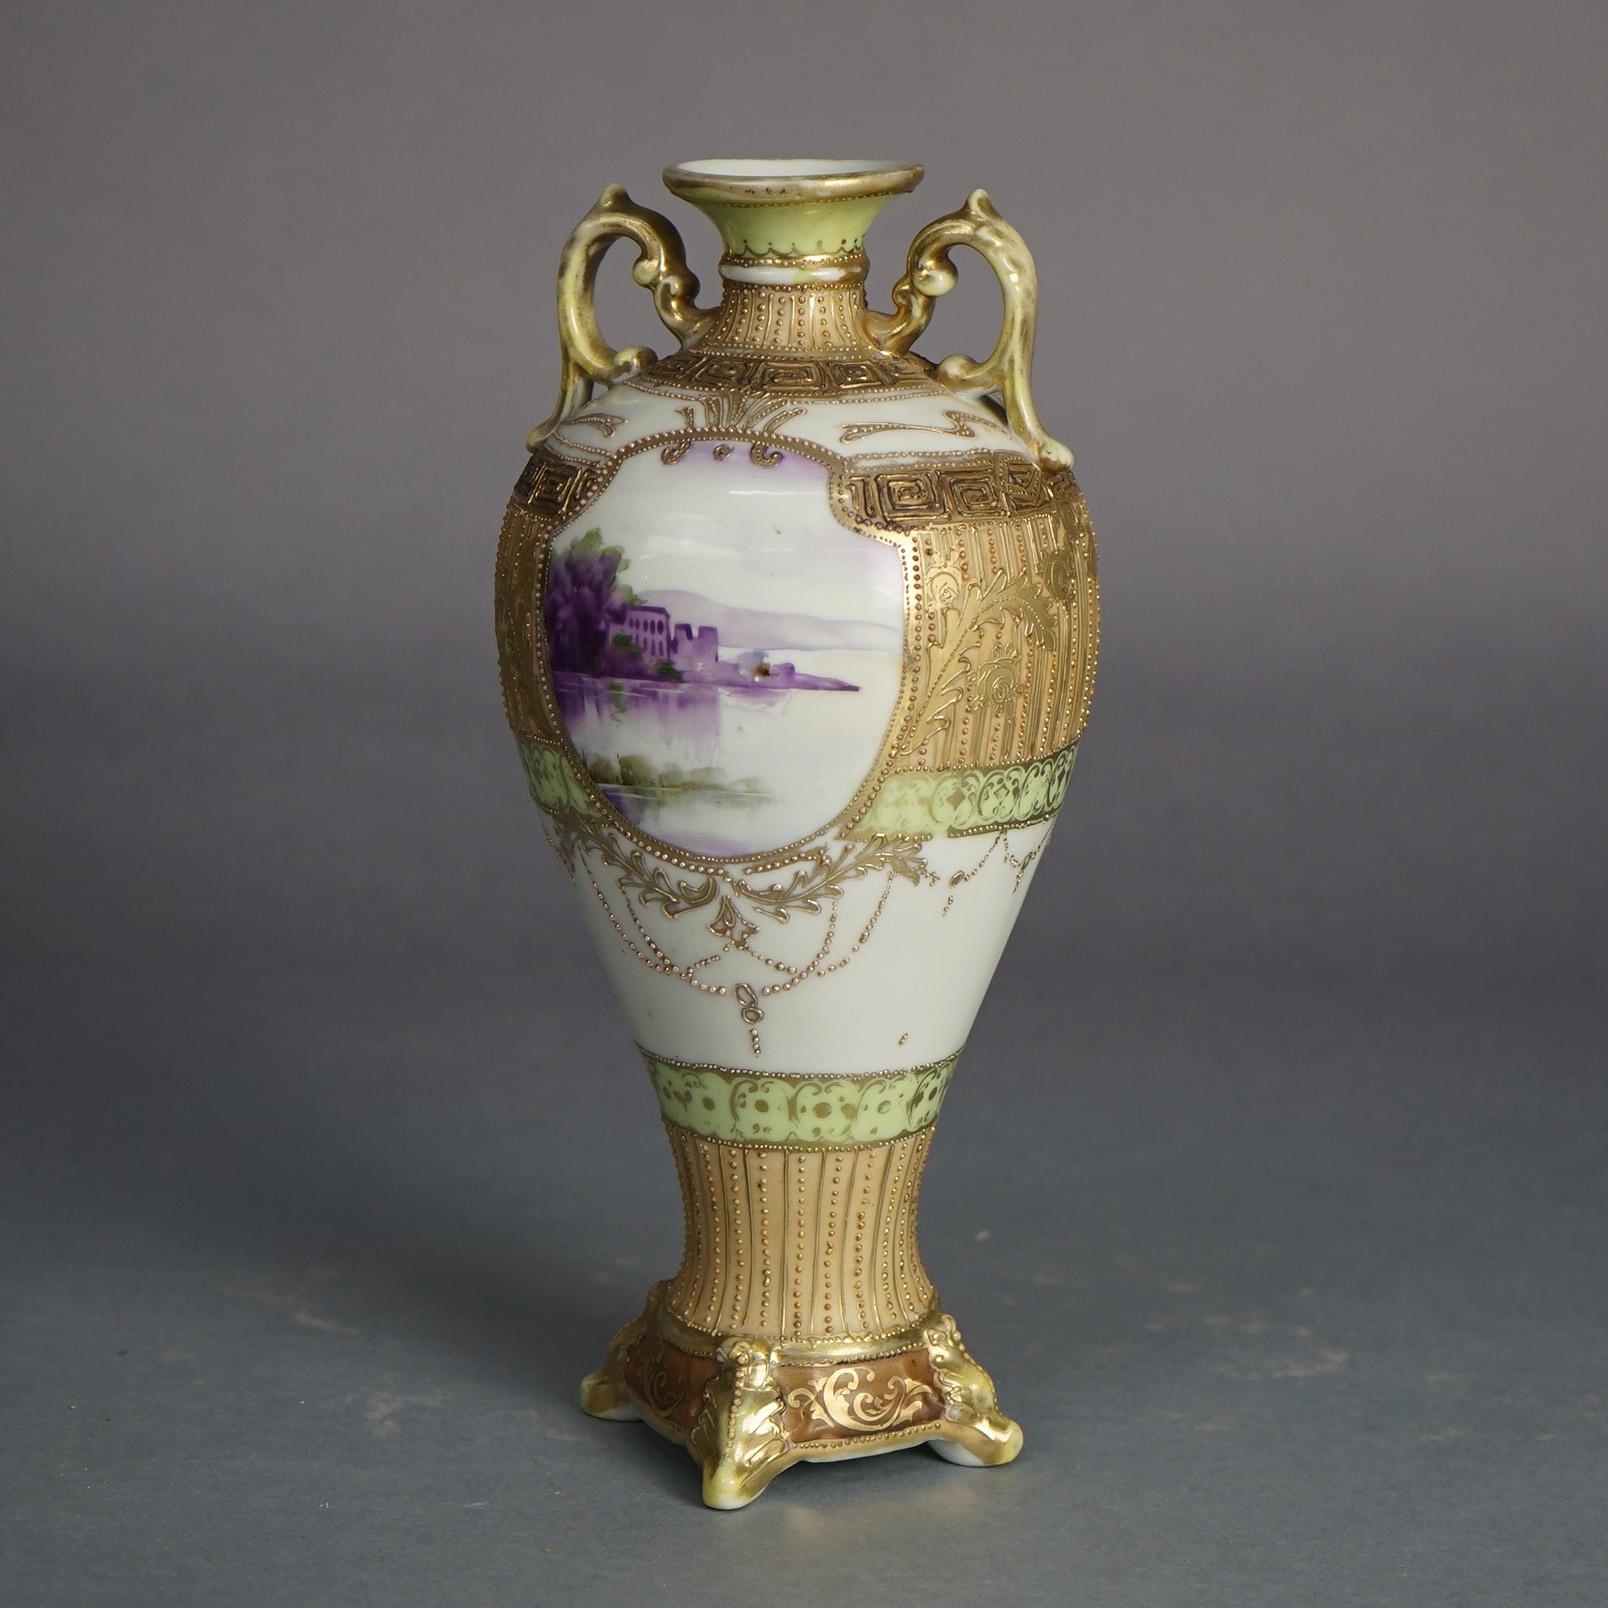 Antique Nippon Hand Enameled & Gilt Porcelain Vase with Lake Scene, Double Foliate Form Handles and Footed, C1920

Measures- 11.75''H x 5''W x 5''D